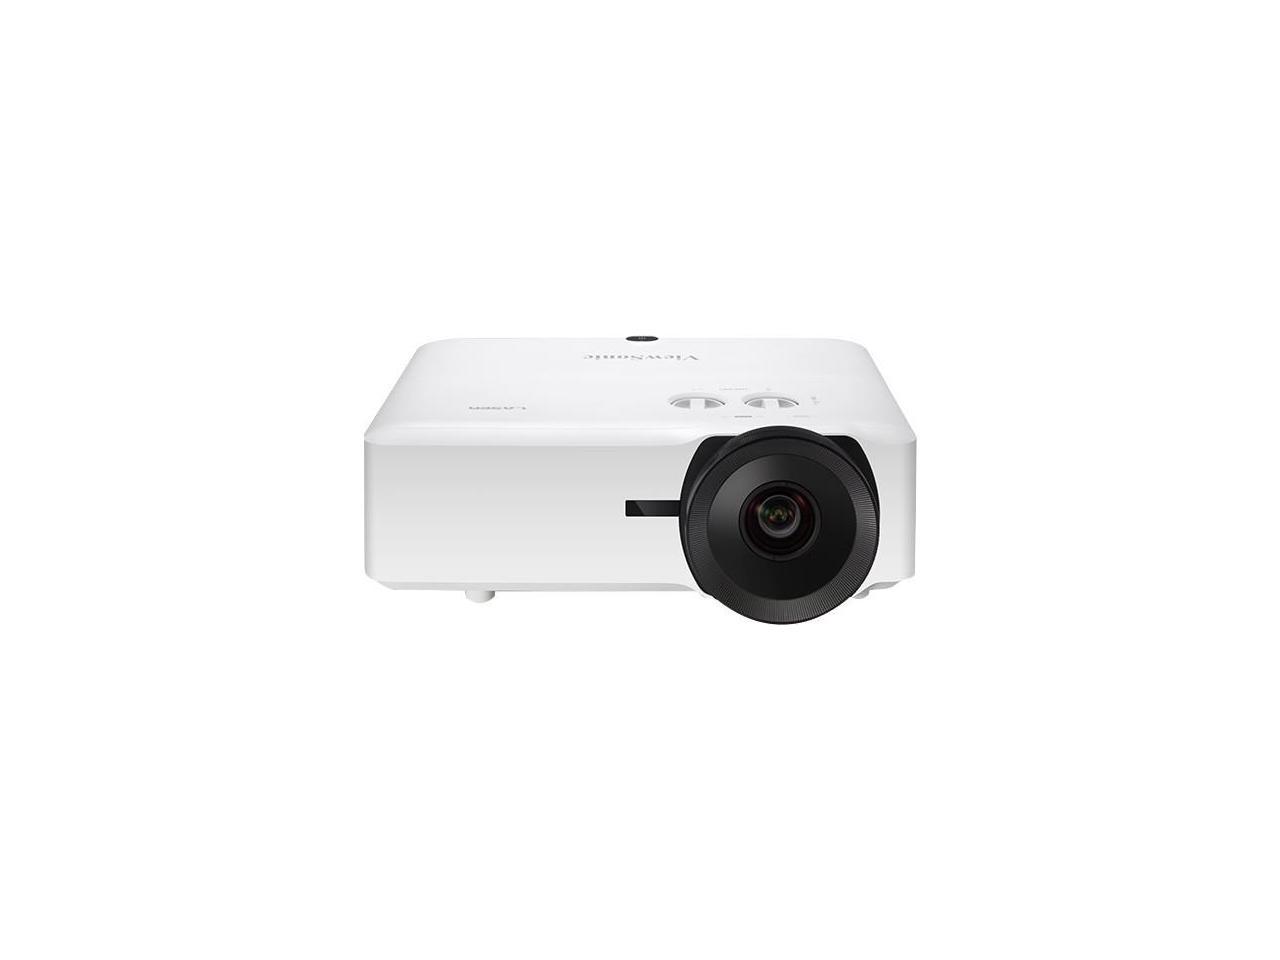 ViewSonic LS860WU 5000 Lumens WUXGA Short Throw Laser Projector with One-Wire HDBT 1.3x Optical Zoom Vertical Horizontal Keystone and Lens Shift